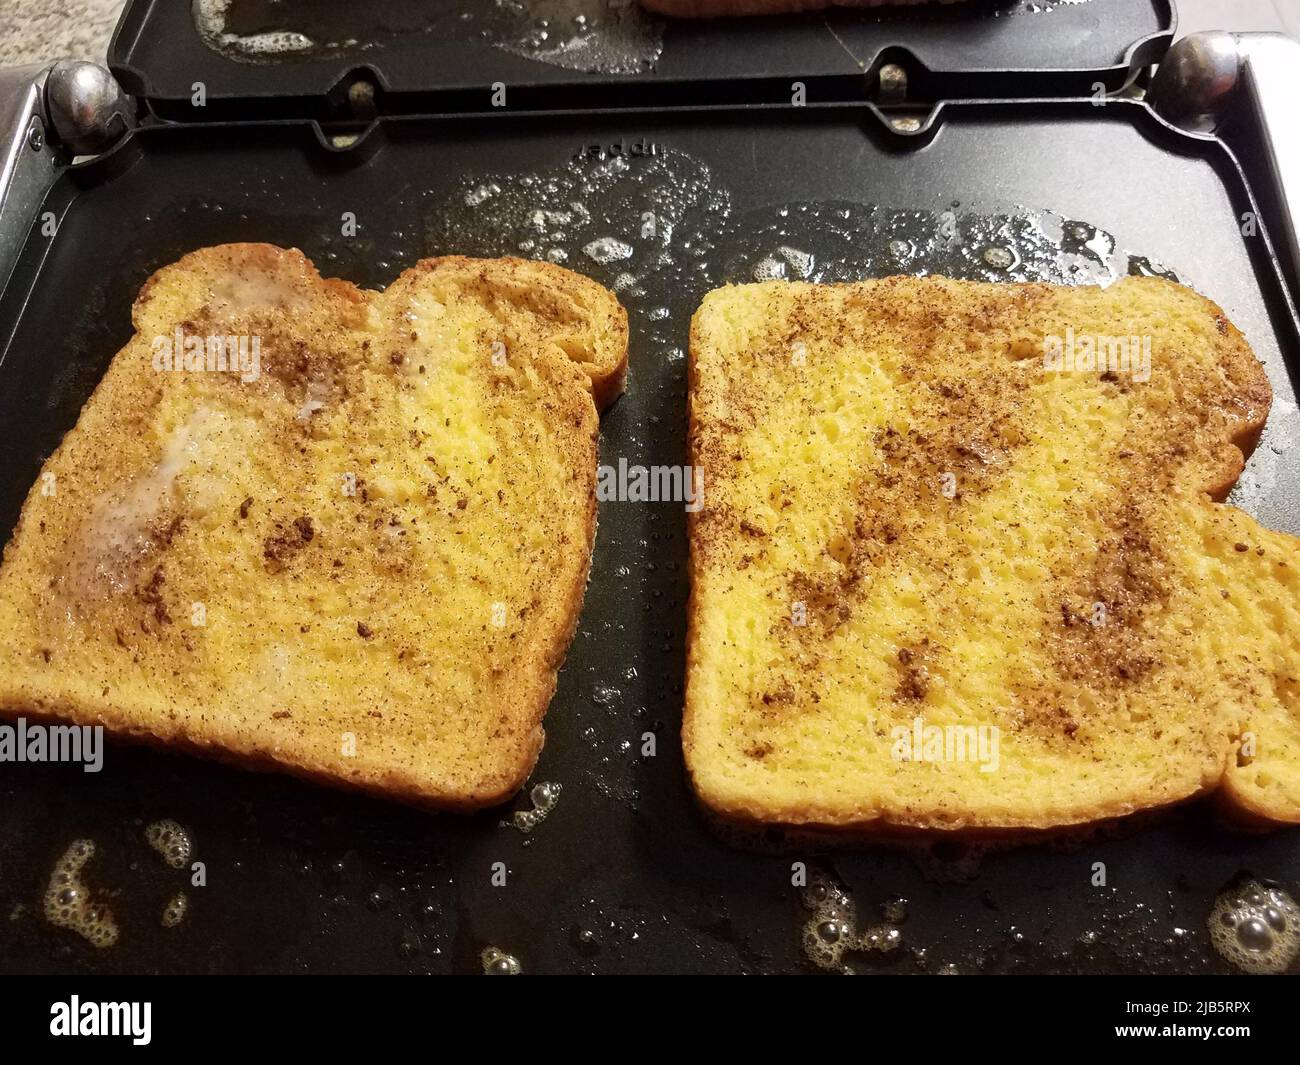 French toast bread with egg and cinnamon cooking on grill or griddle. Stock Photo